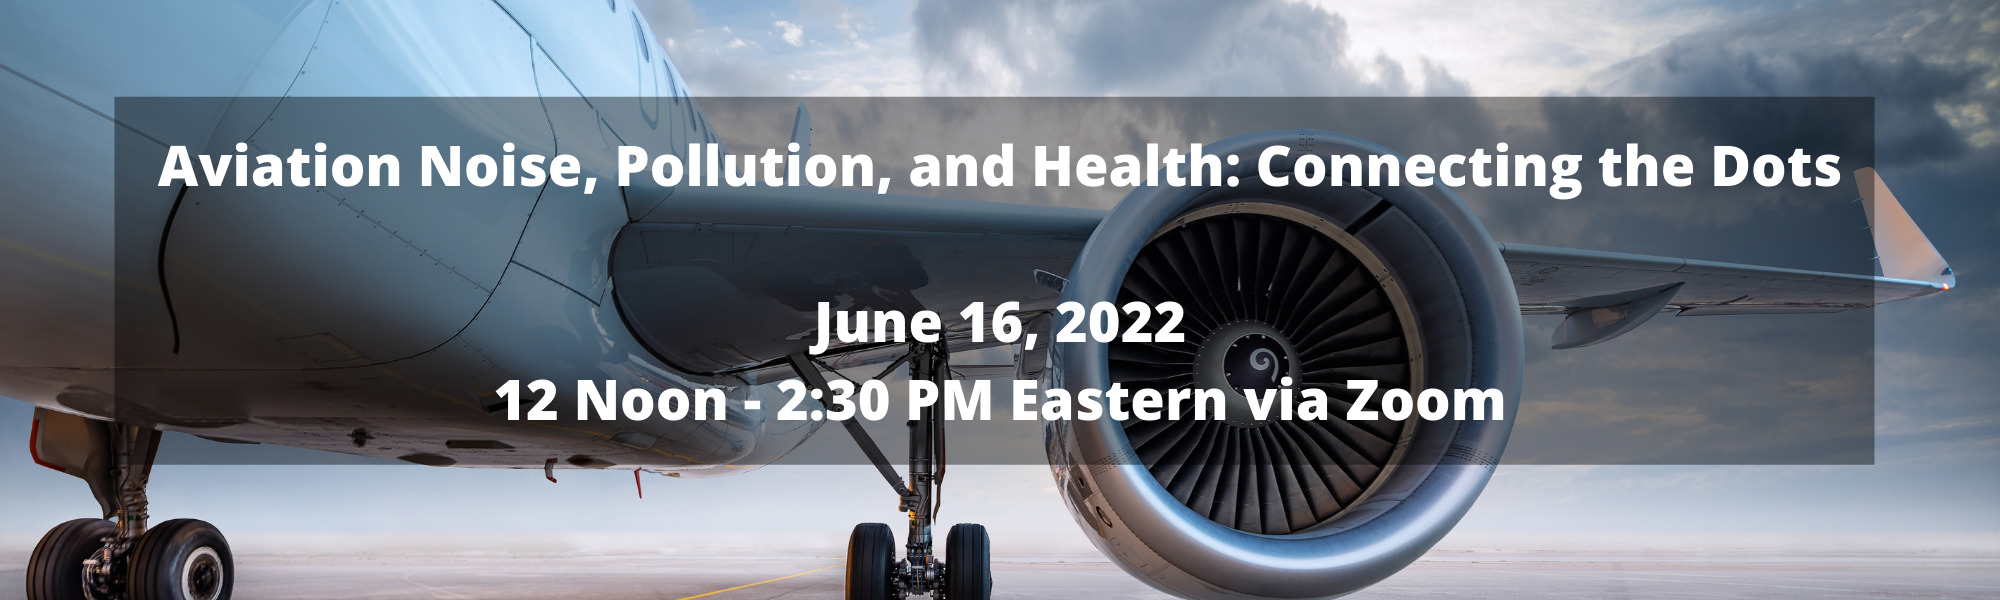 Aviation, Noise, Pollution and Health: Connecting the Dots